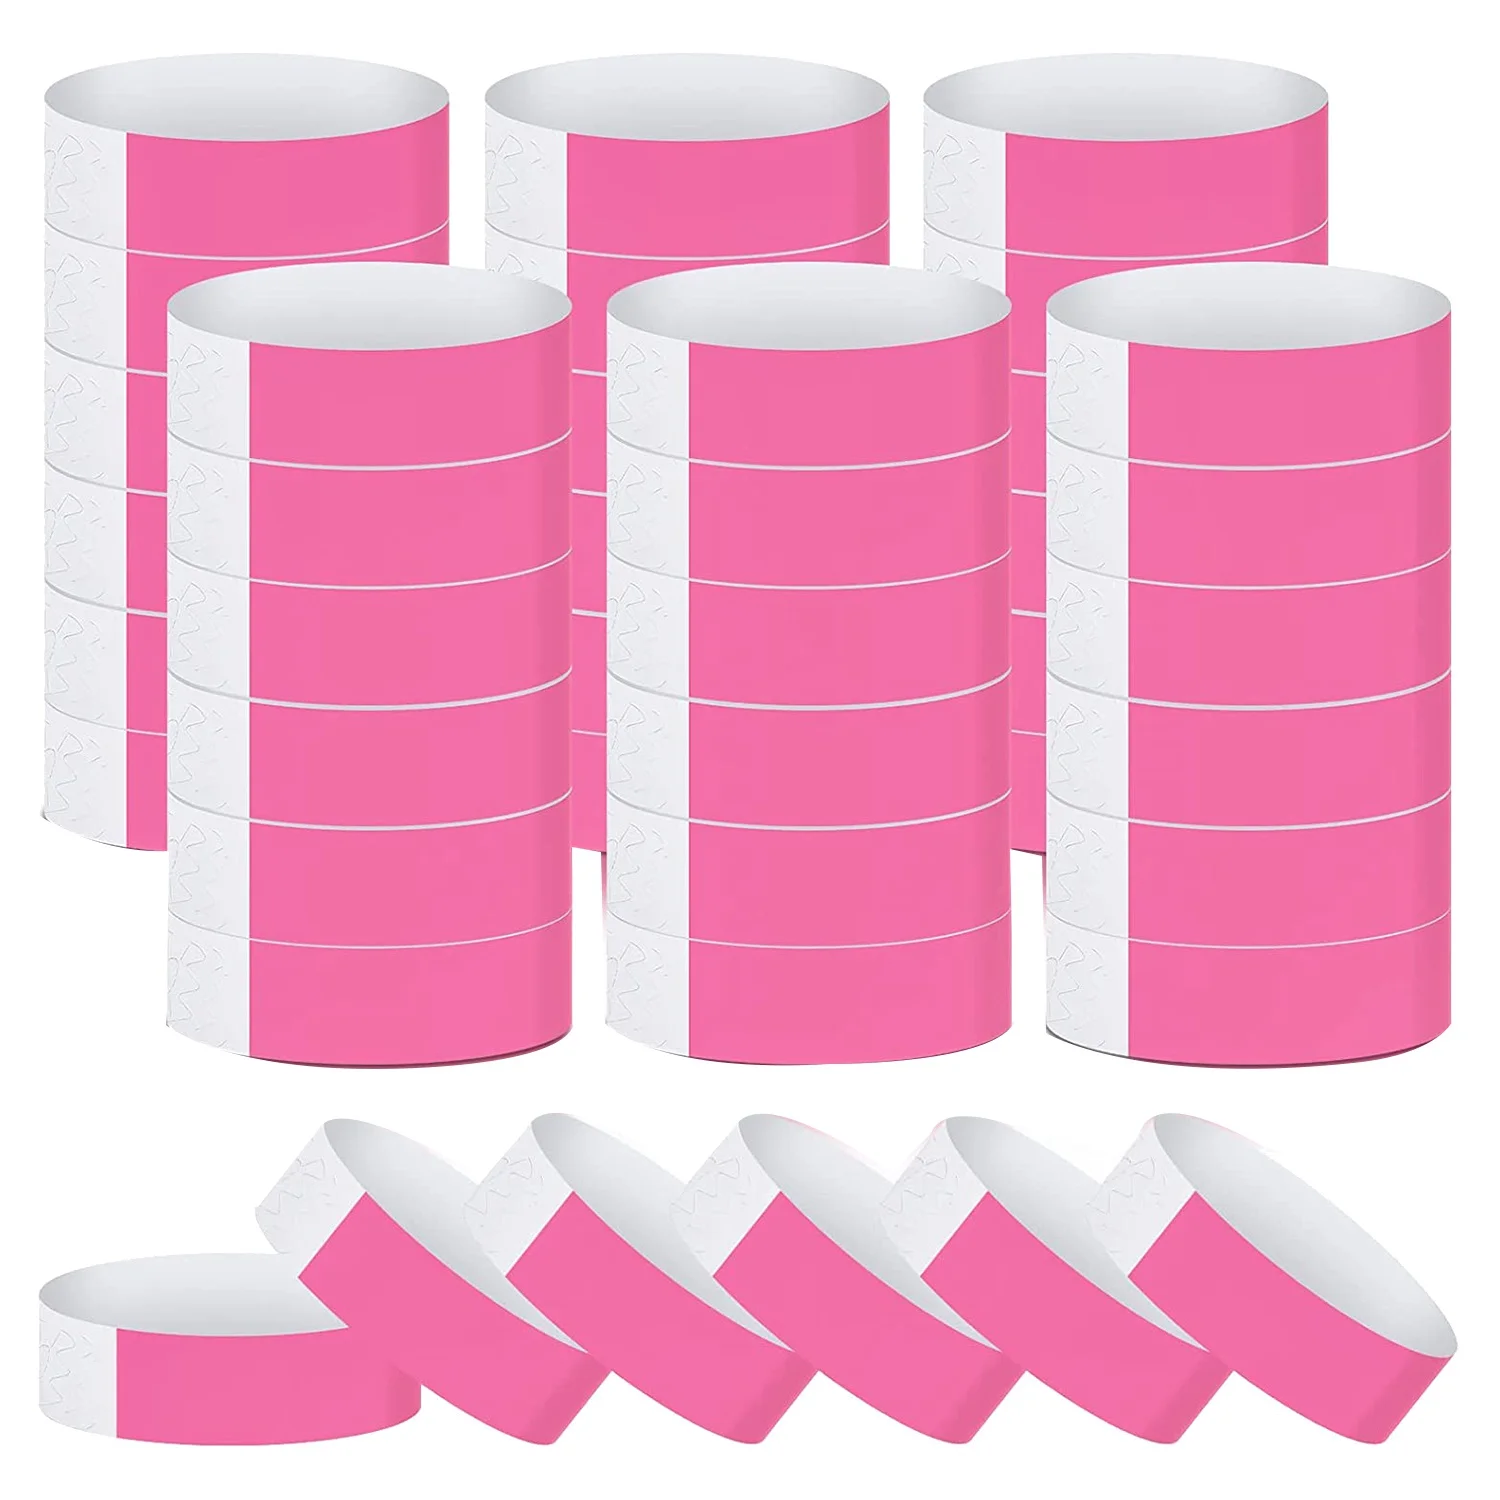 

600 Packs of Paper Wristbands Neon Event Wristbands Colorful Wristbands Waterproof Paper